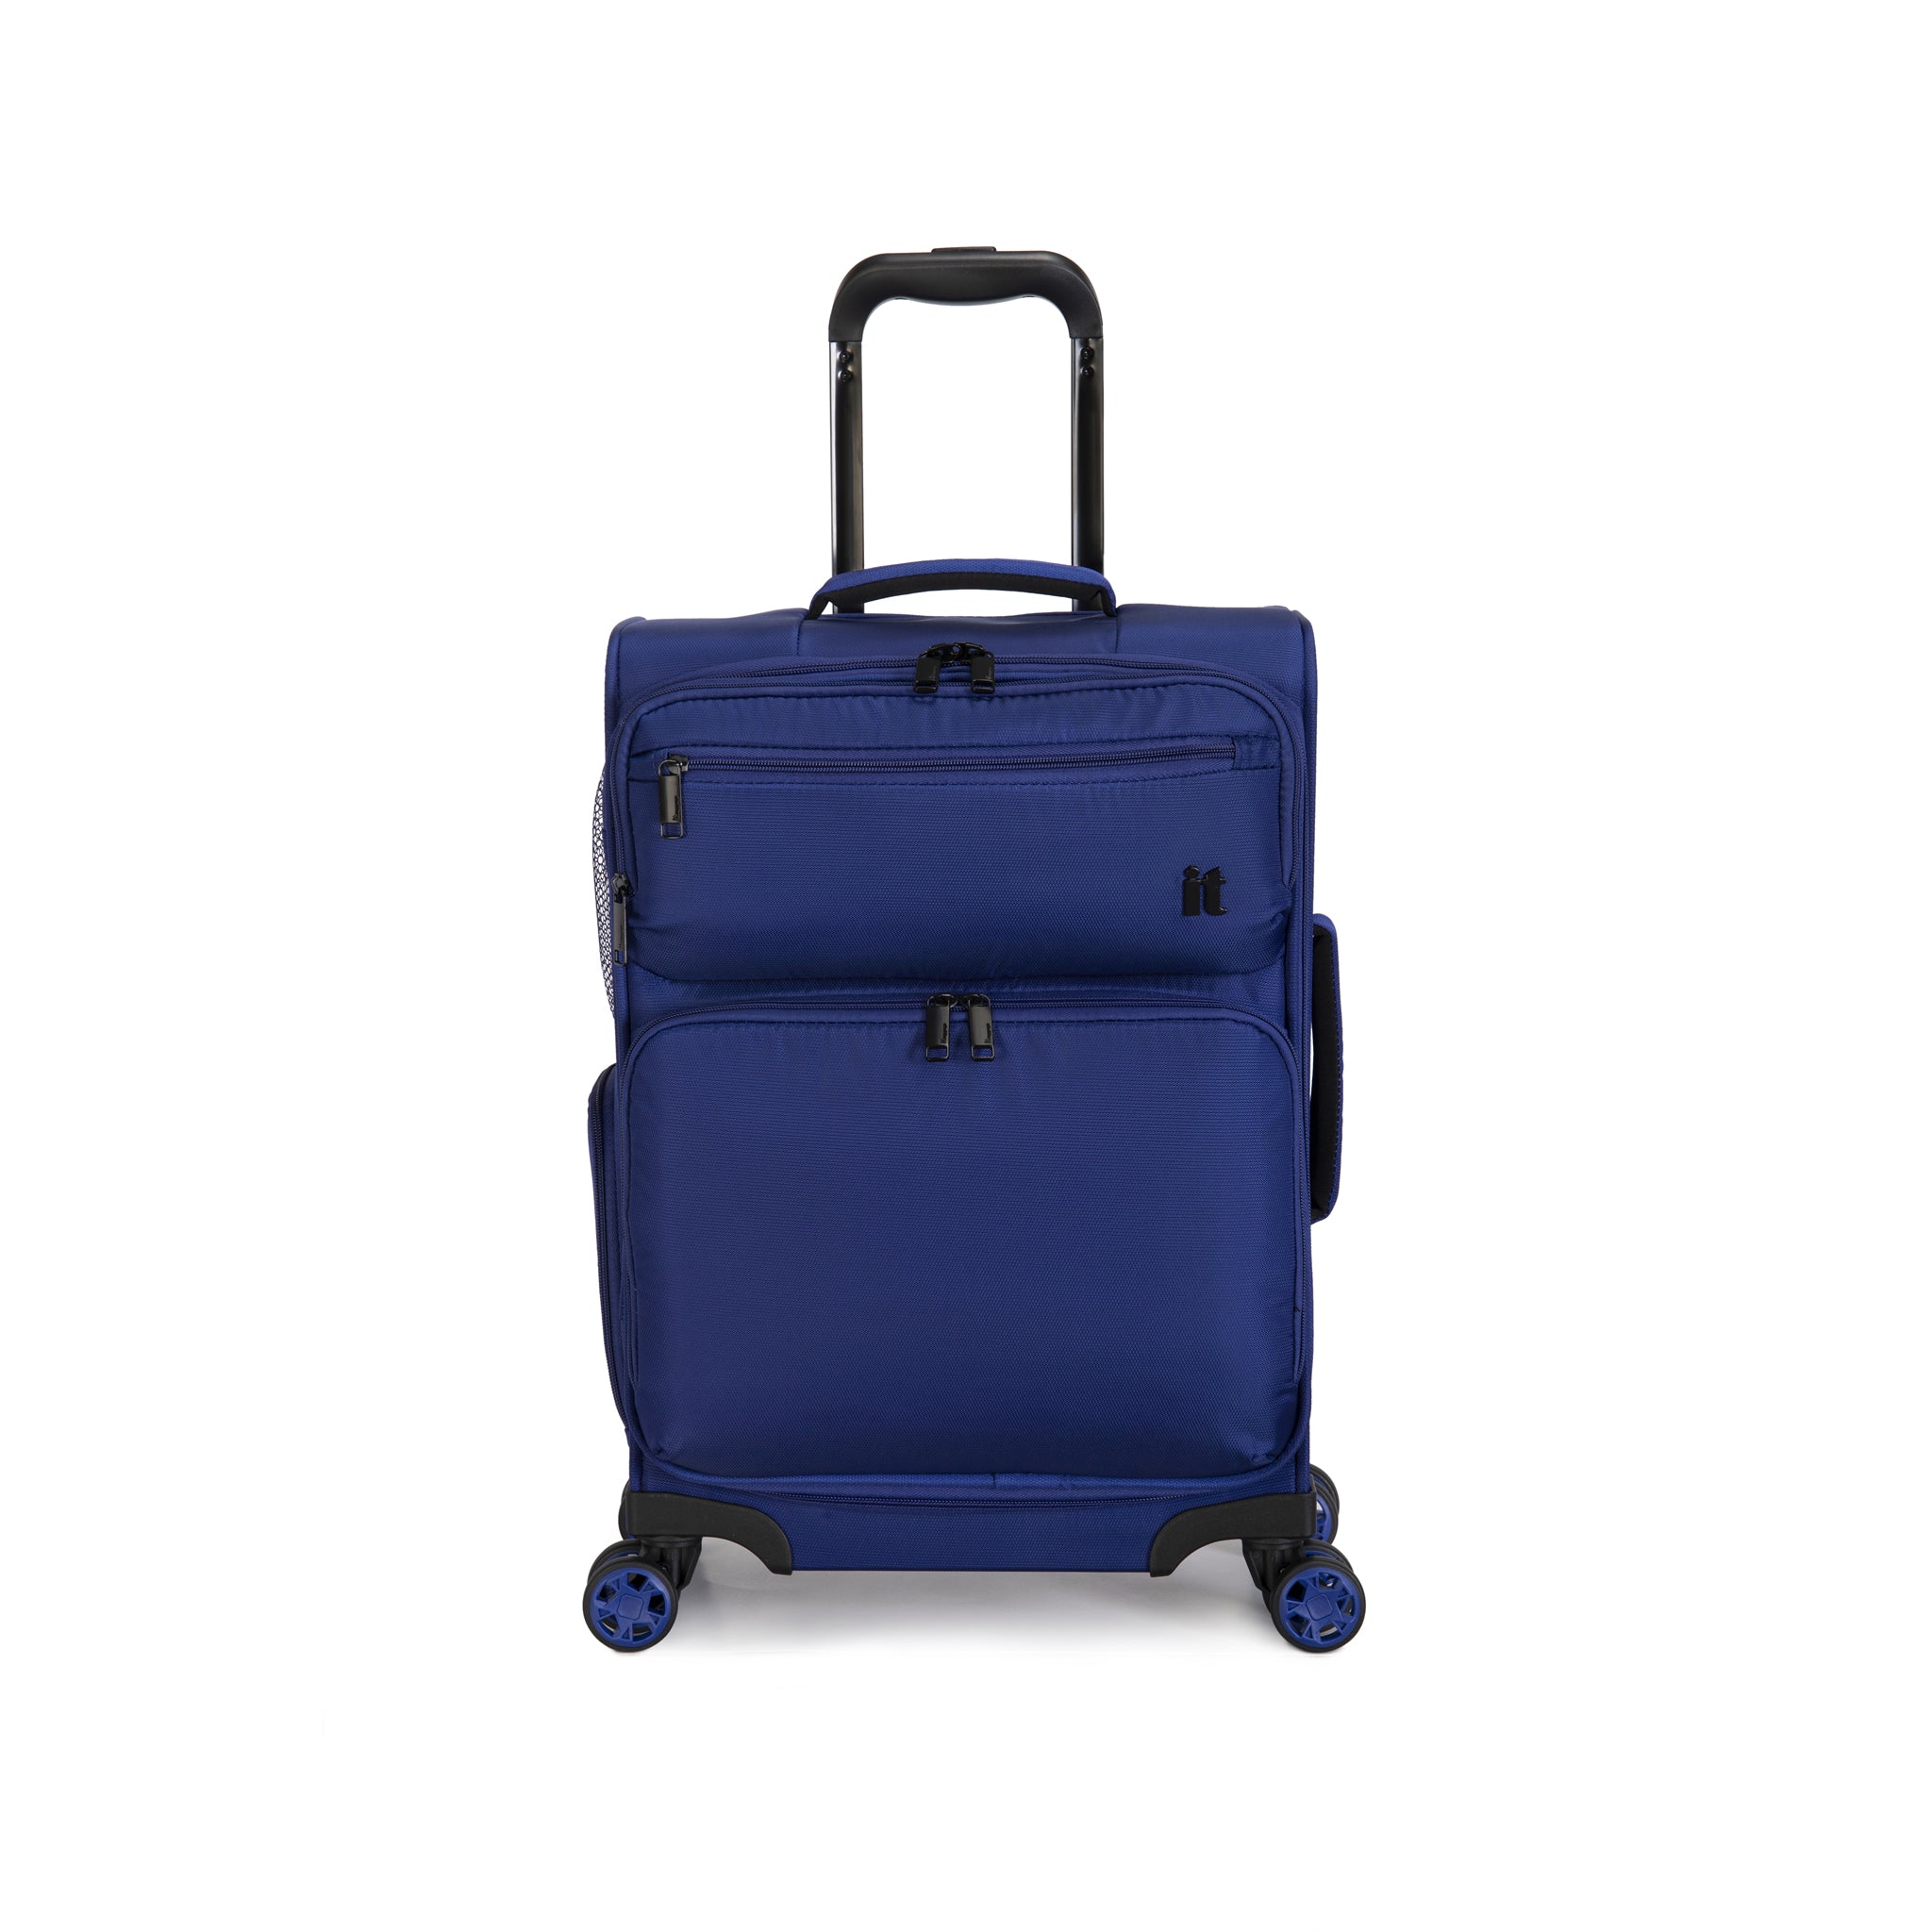 it Luggage | Downtime - Sit-On Cabin in Blue